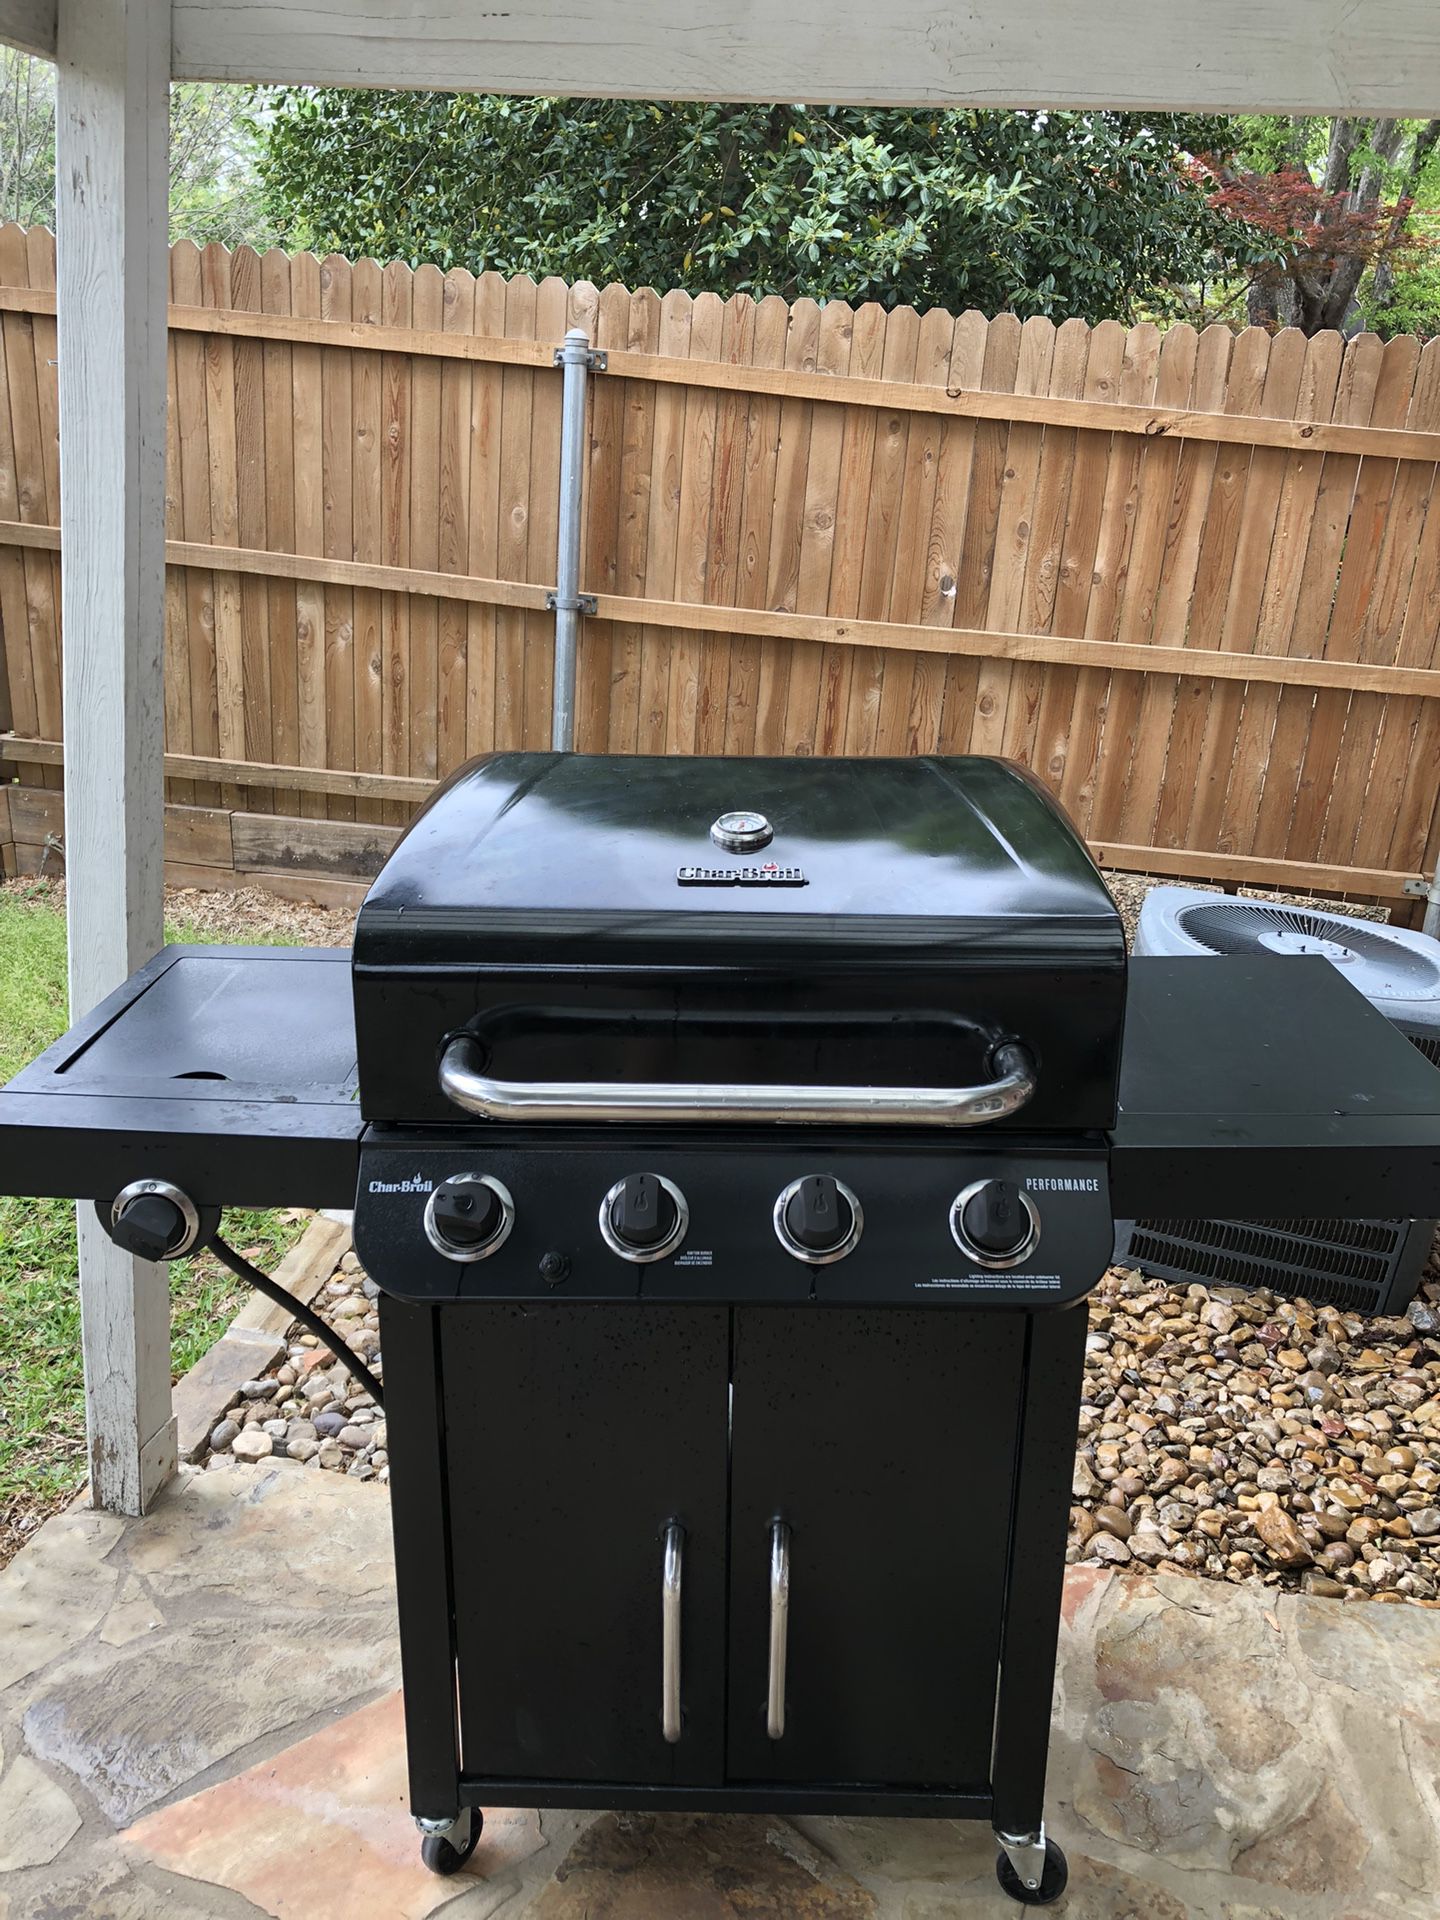 Grill/ BBQ outdoor